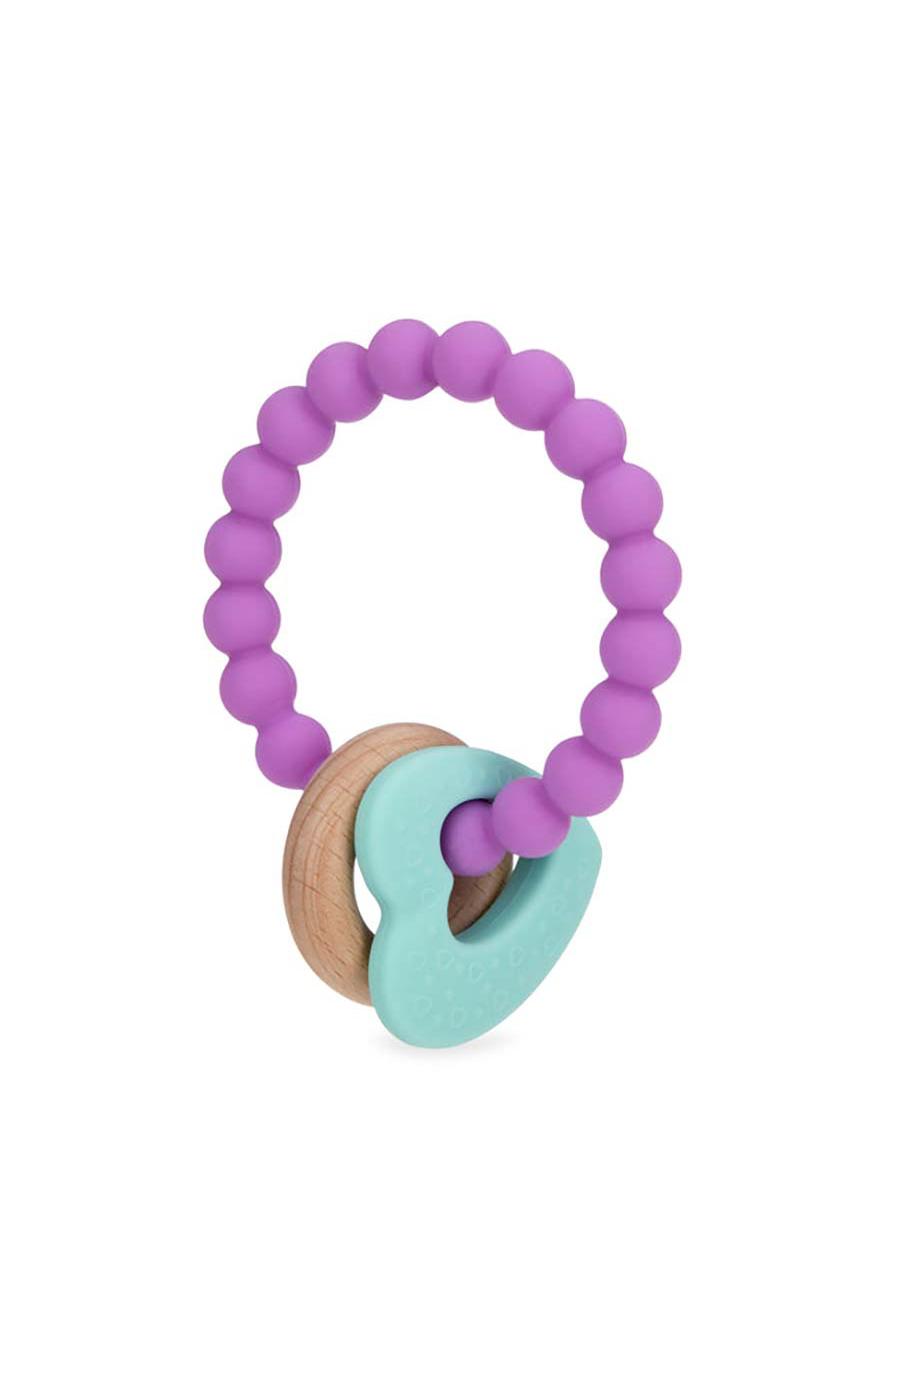 Nuby Natural Teether Wood + Silicone; image 2 of 2